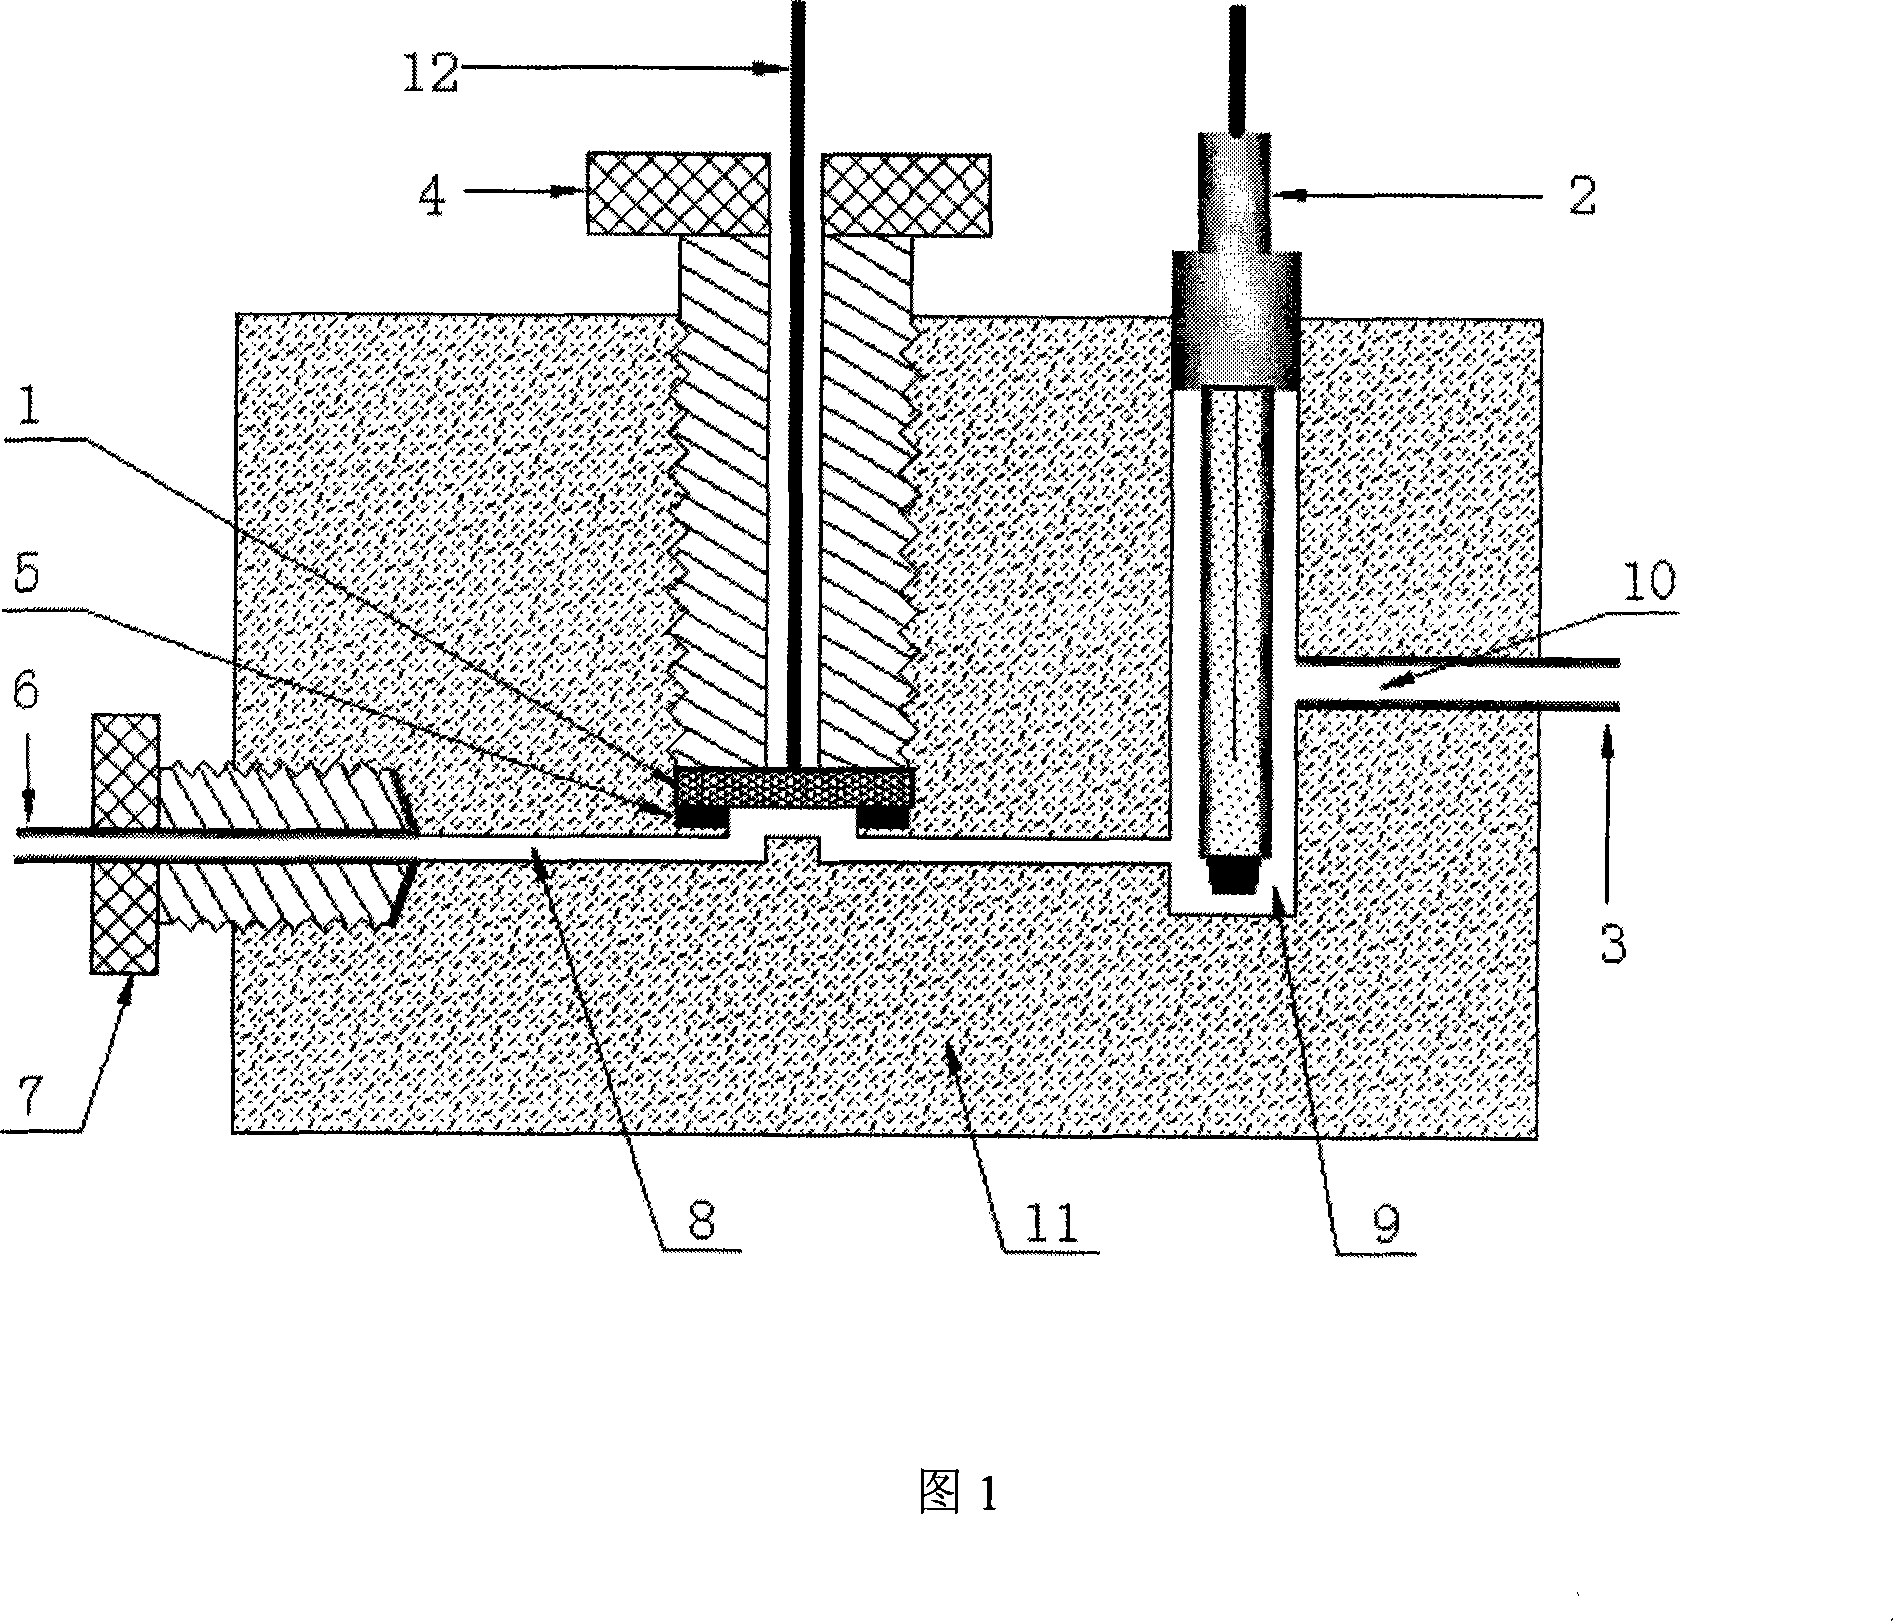 Subaqueous chemical oxygen demand measuring apparatus and method and method based on flow injection sampling